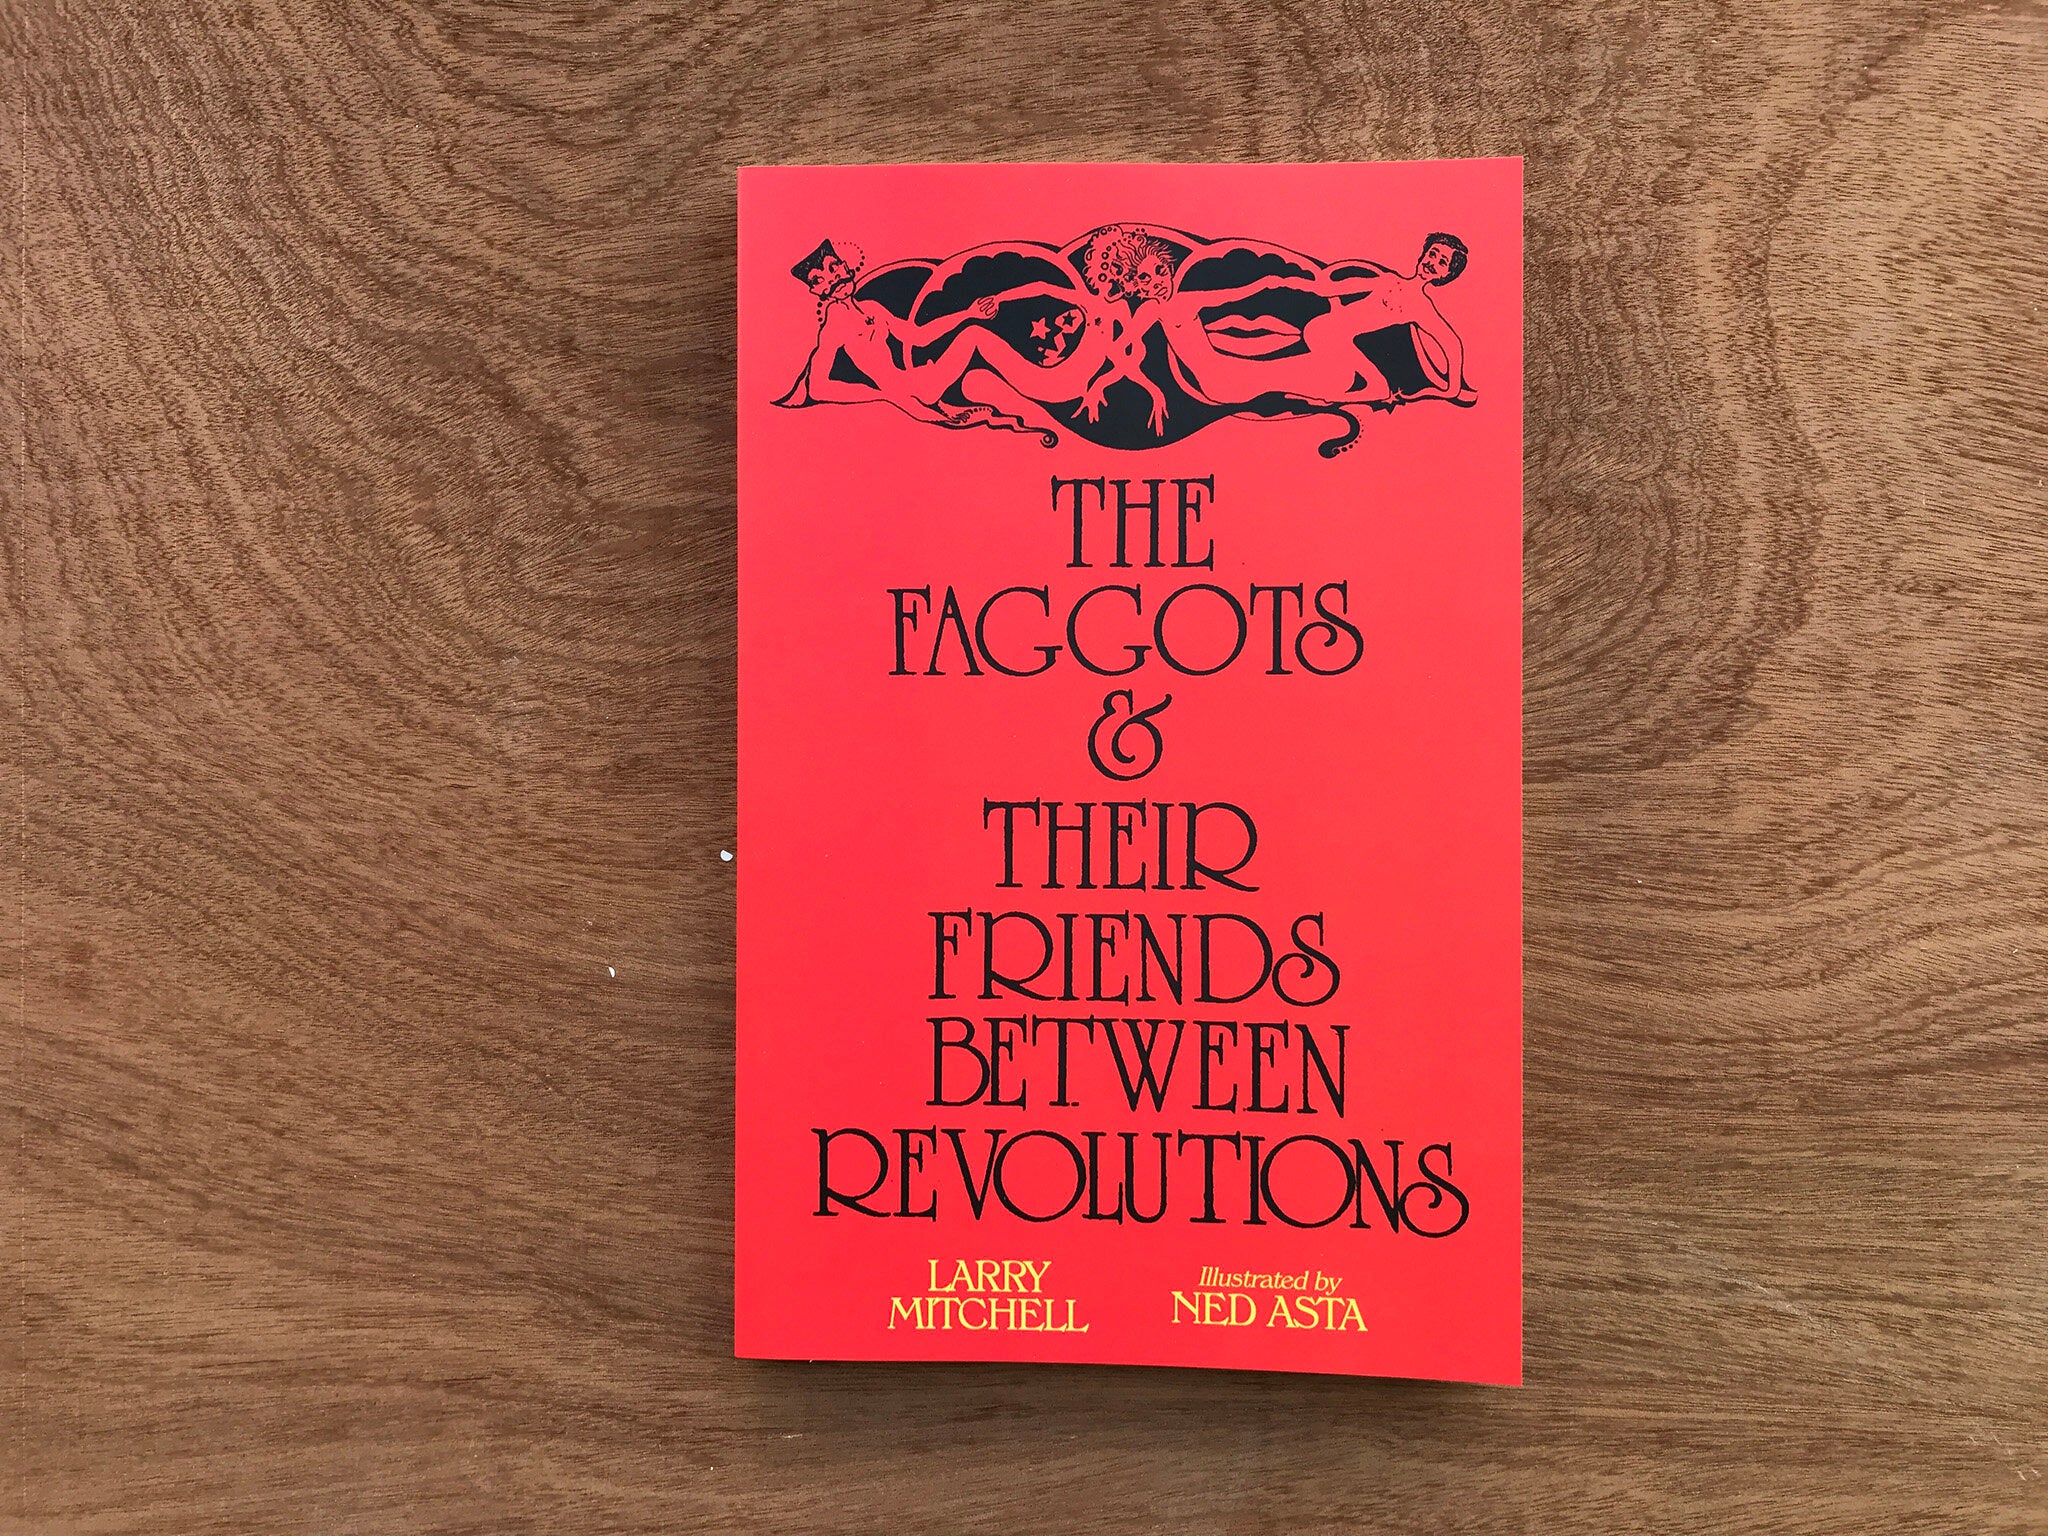 THE FAGGOTS AND THEIR FRIENDS BETWEEN REVOLUTIONS by Larry Mitchell and Ned Asta